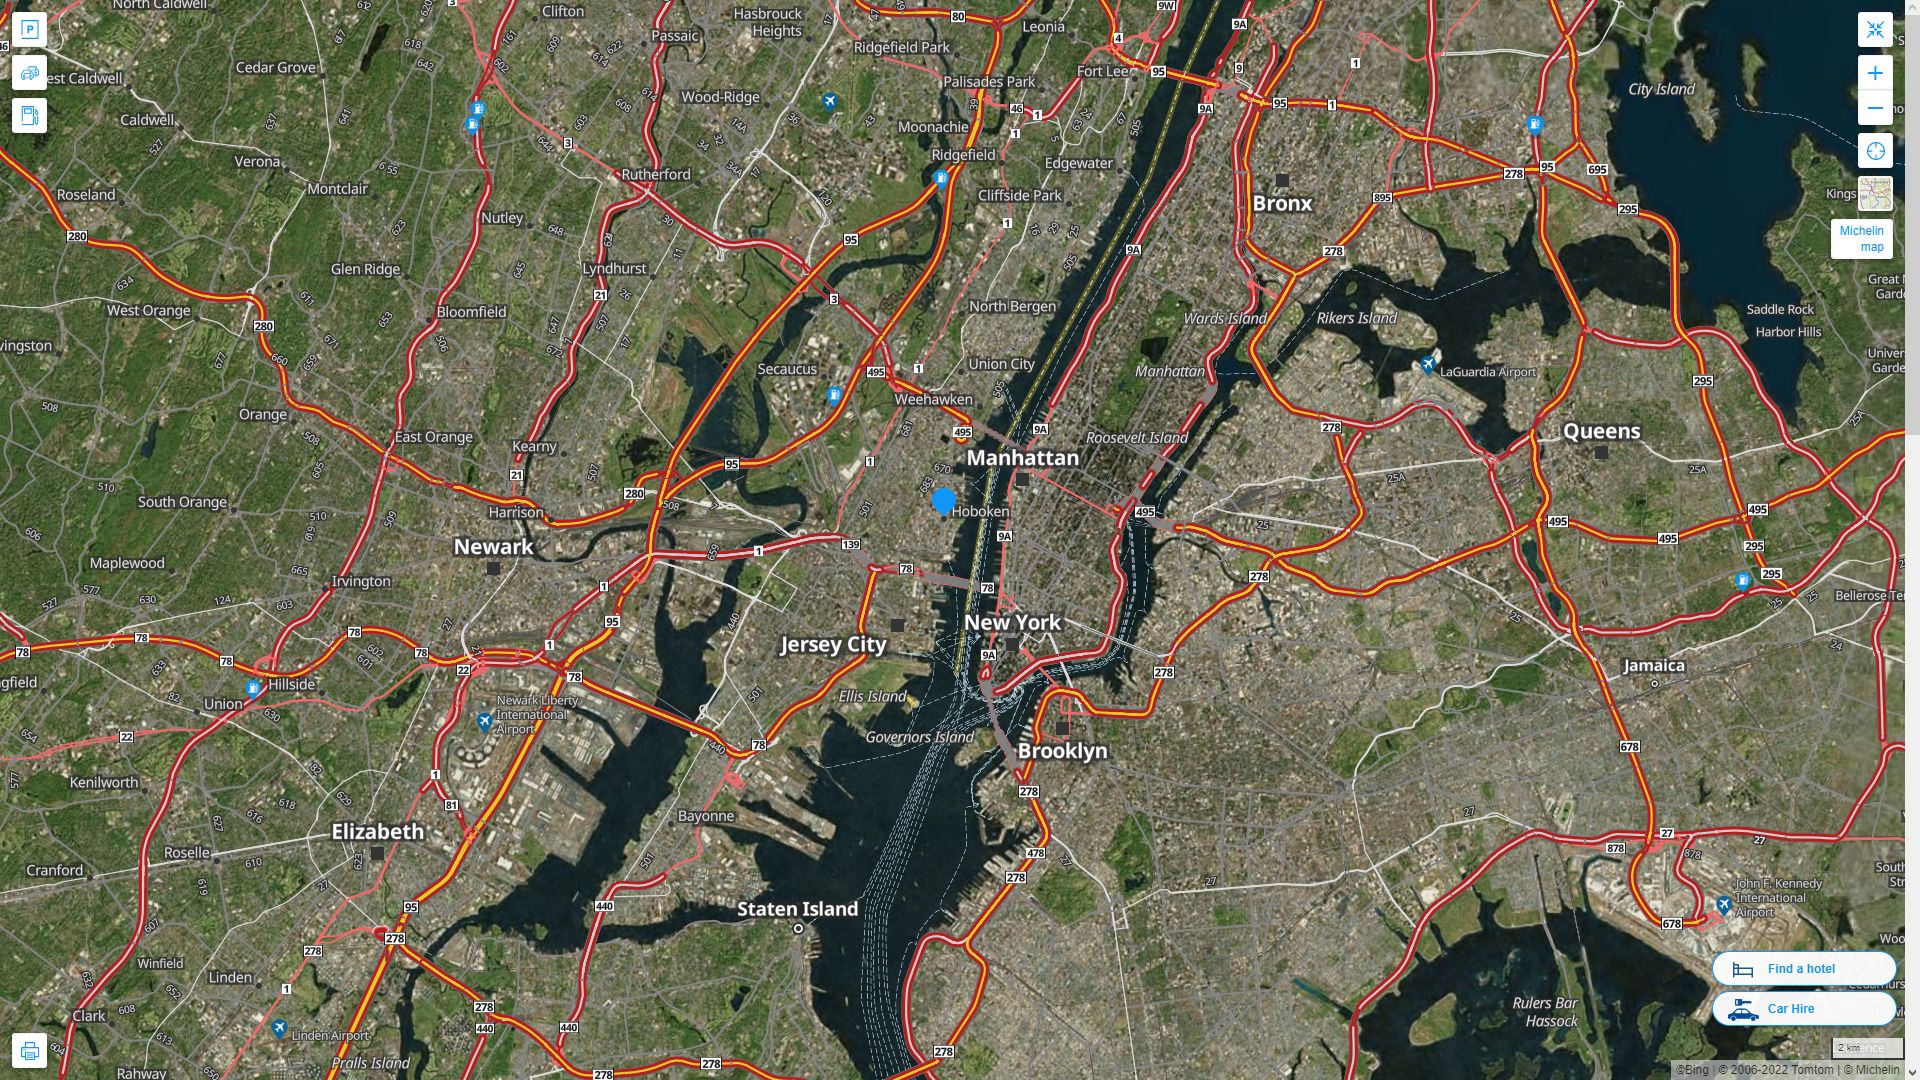 Hoboken New Jersey Highway and Road Map with Satellite View